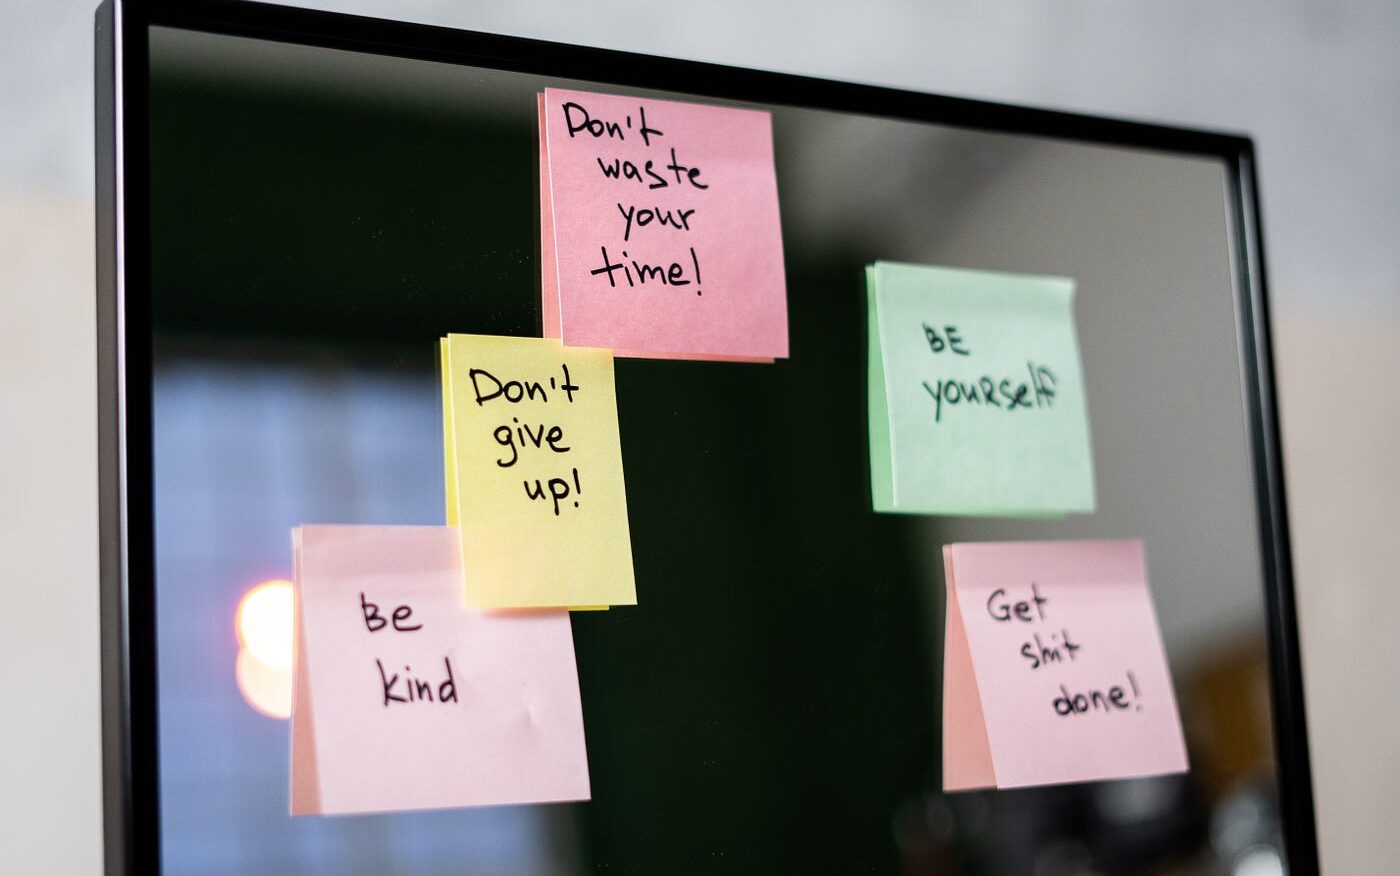 multiple sticky notes with different inspirational quotes on a black screen